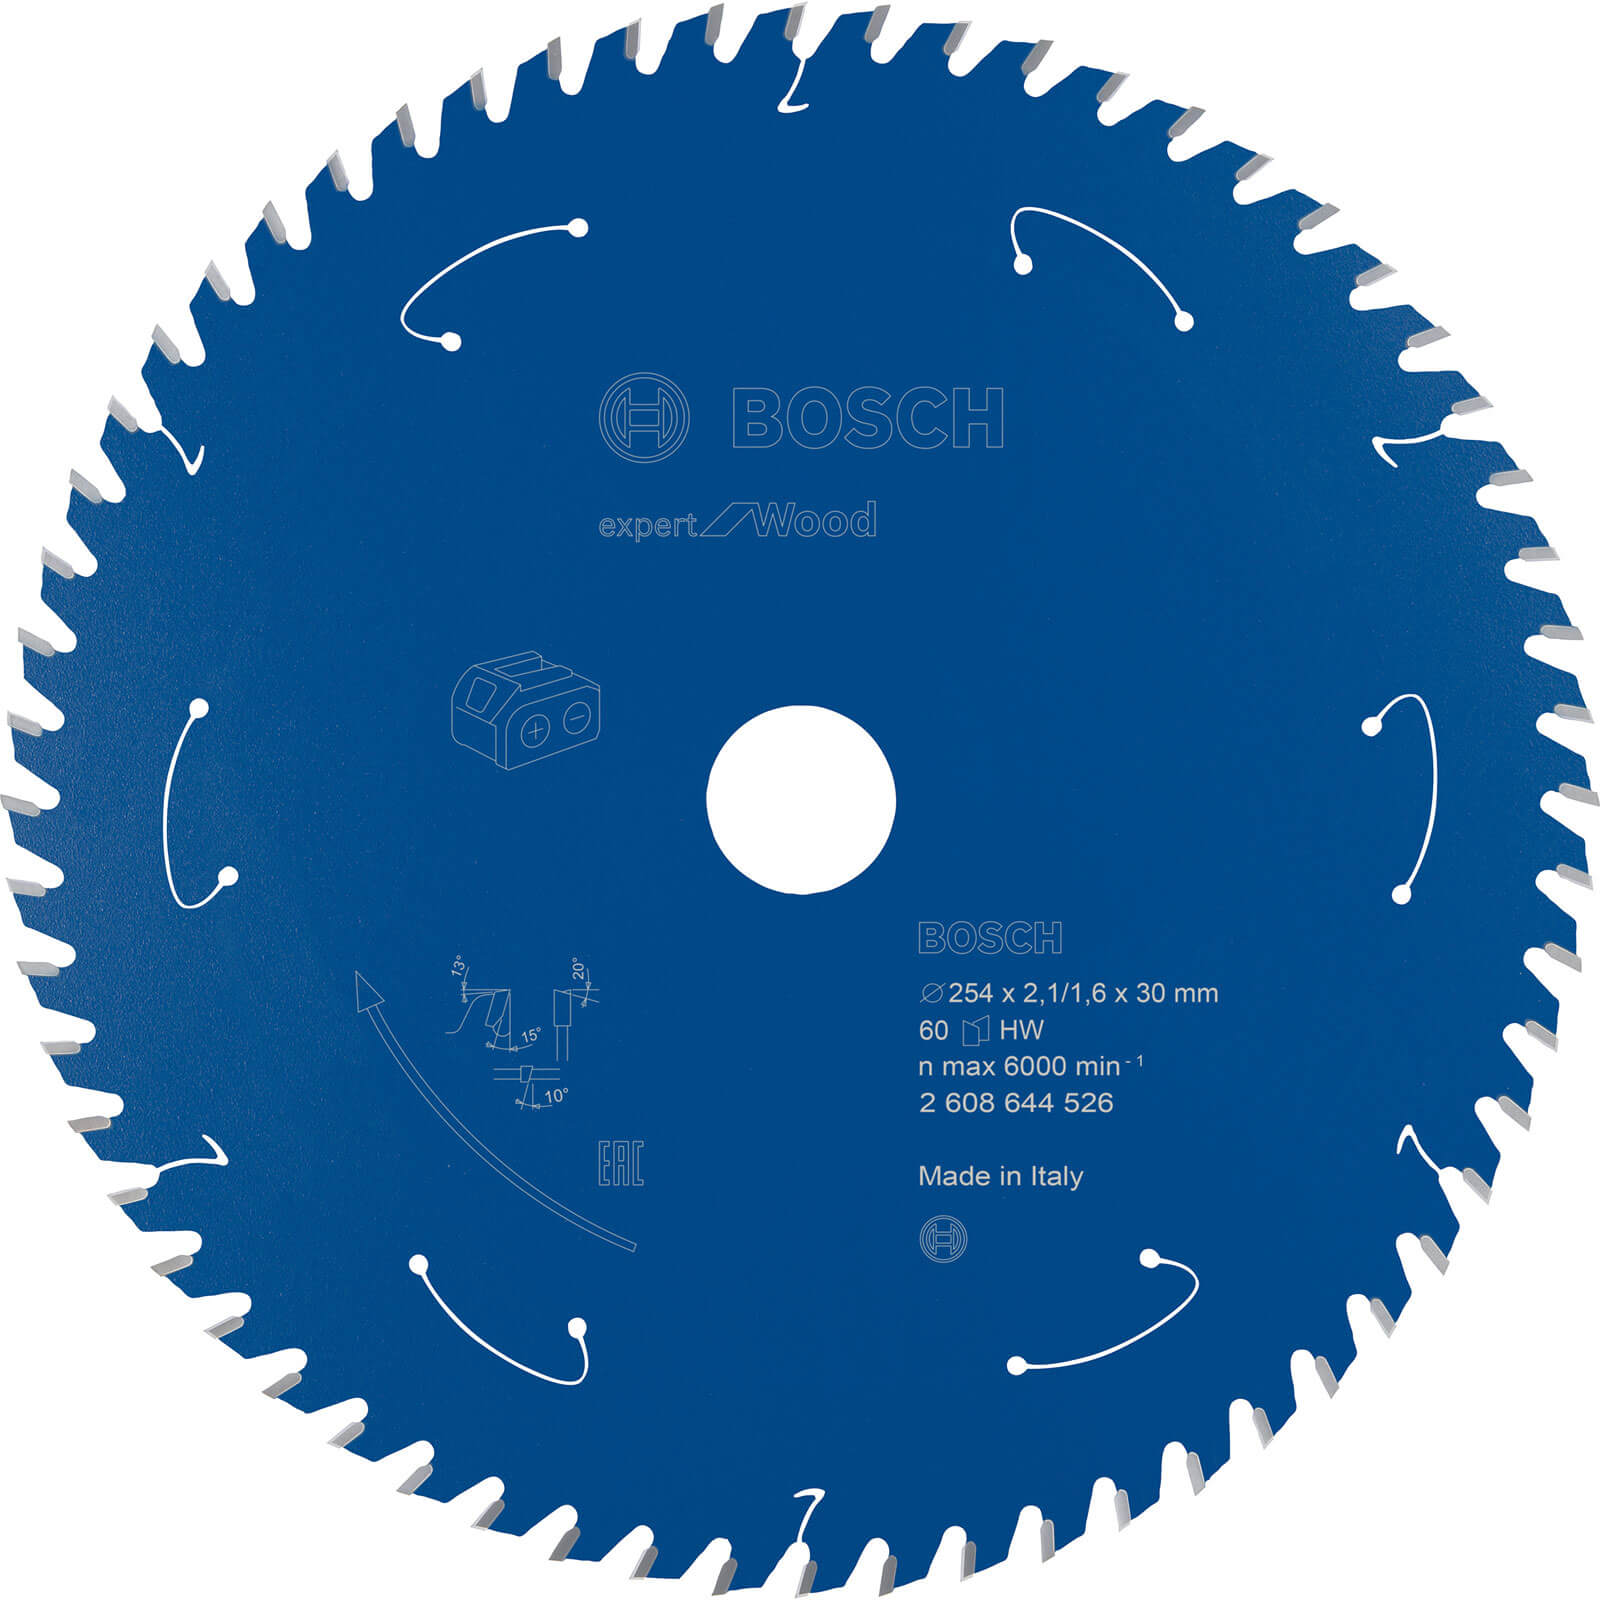 Image of Bosch Expert Wood Cutting Table Saw Blade 254mm 60T 30mm